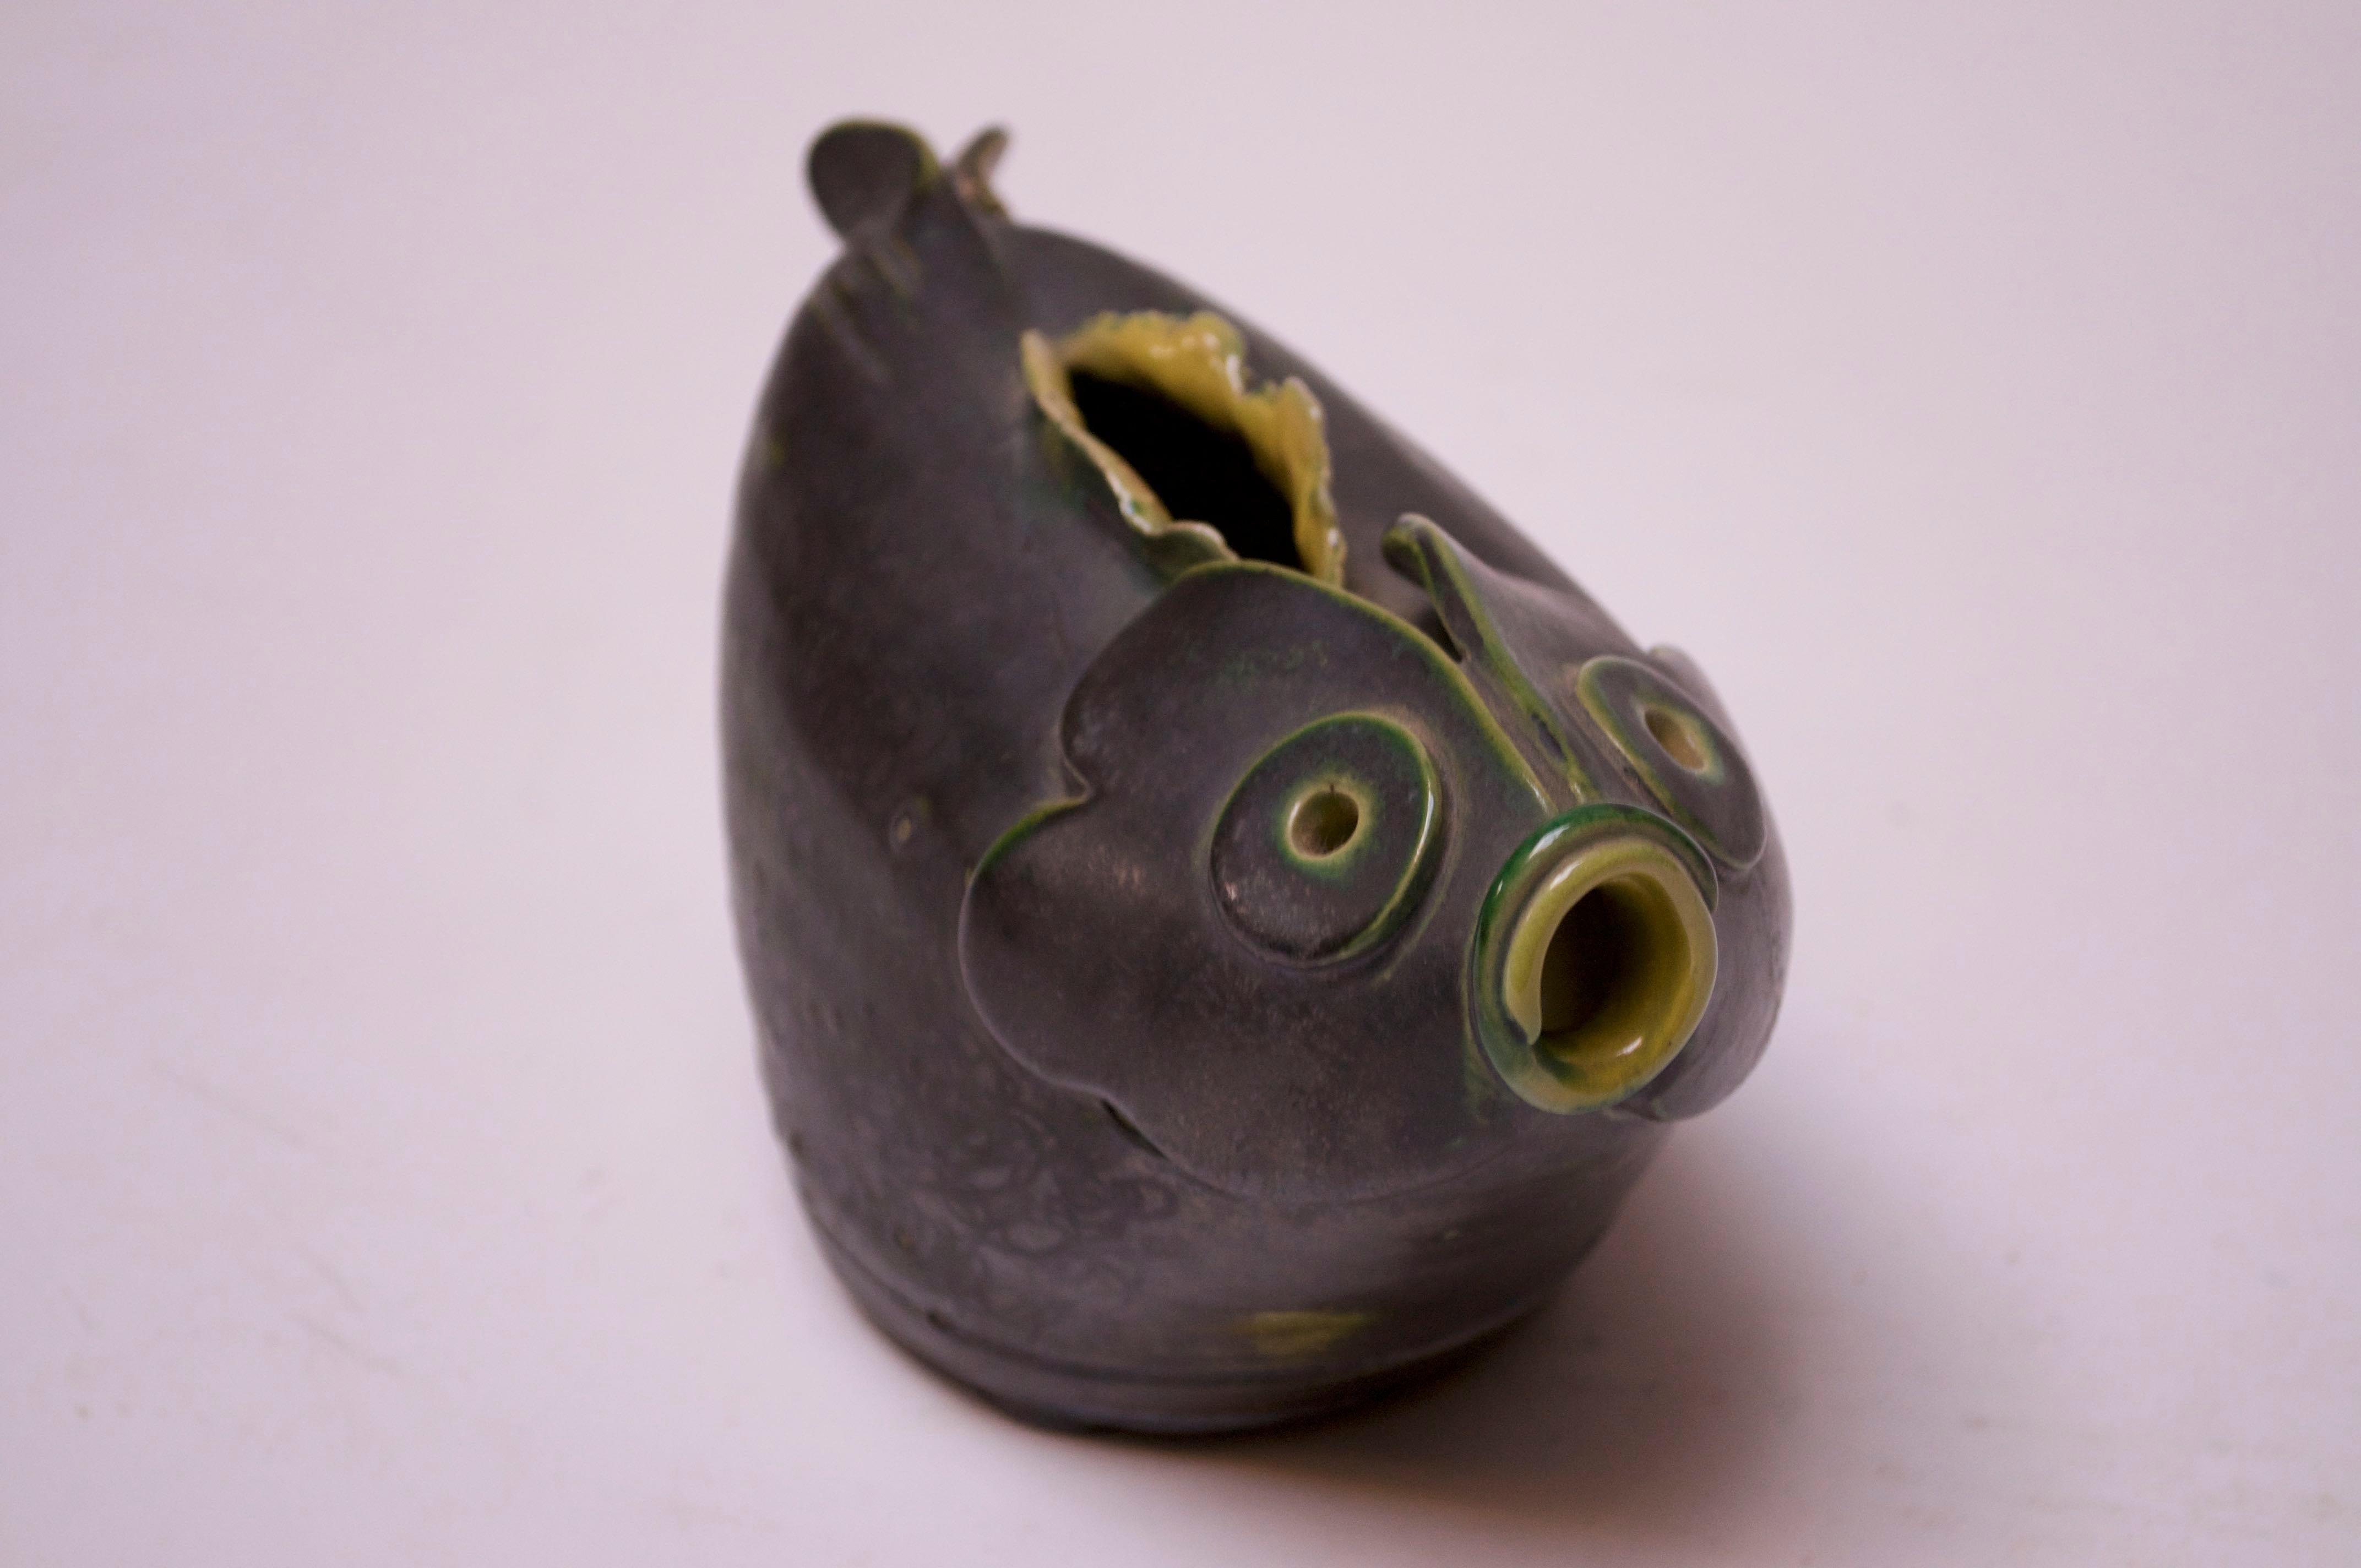 Late 1940s Studio Pottery fish pitcher / decorative object by ceramicist and former art professor, Emily Reinse. Unique incorporation of textures / glazes with green and yellow hand painted decoration over an iron-gray metallic finish. This listing